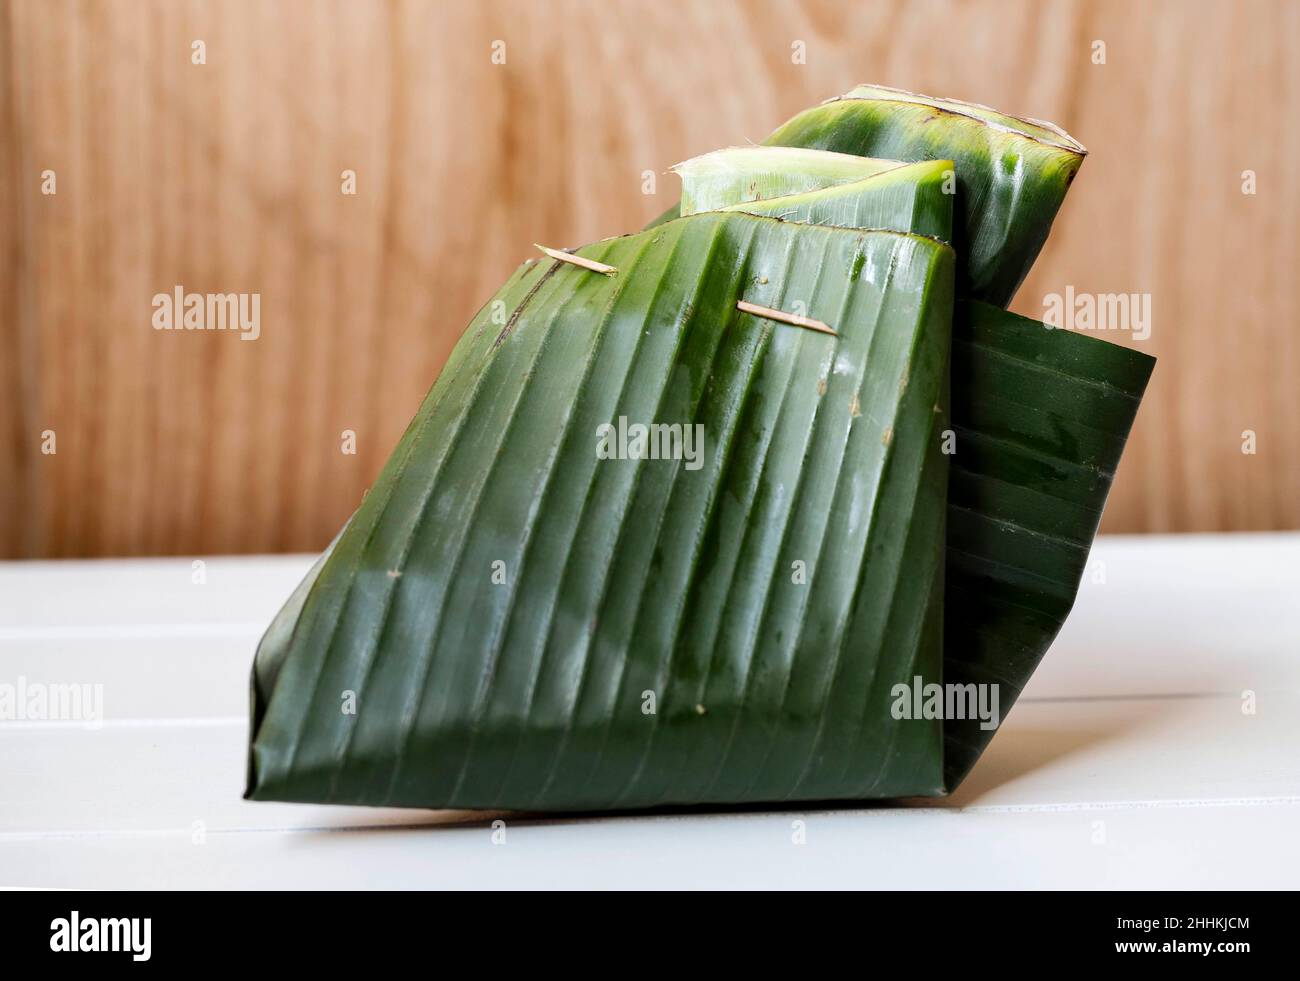 Indonesian Art Wrap with Banana Leaf. Usually Rice, or Snack Inside. Go Green Wrapping Packaging Stock Photo